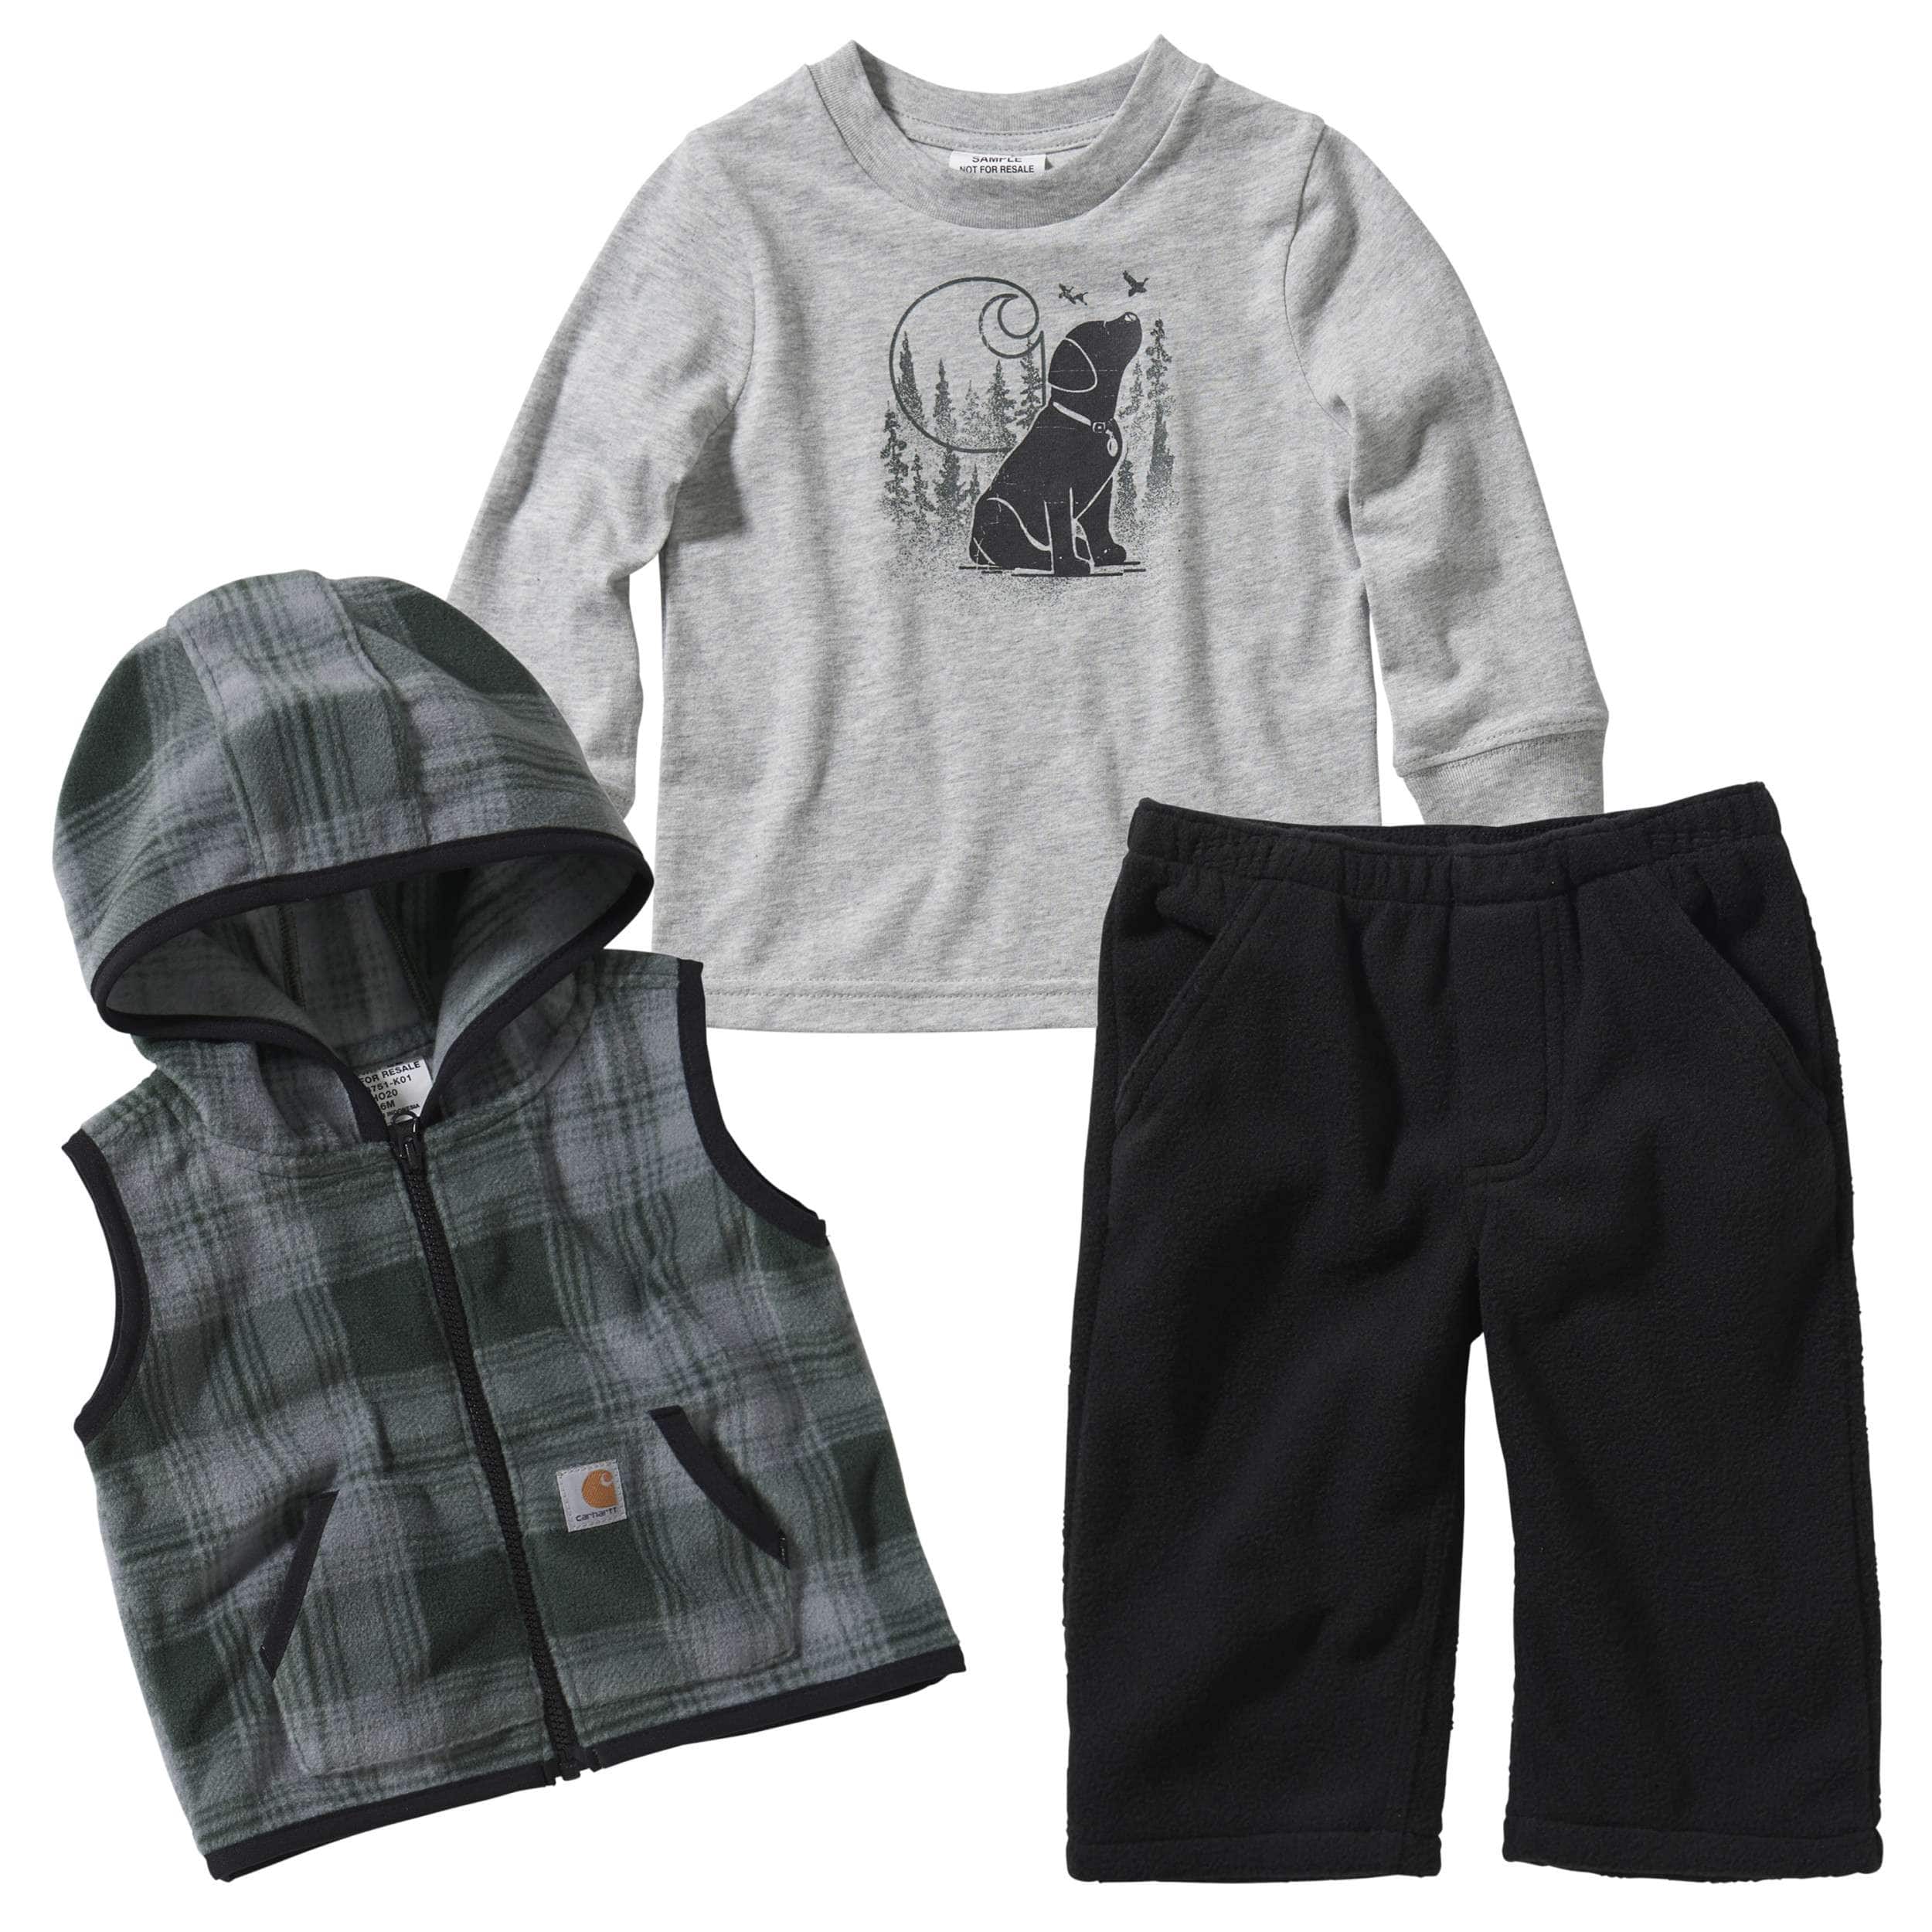 carhartt baby clothes uk